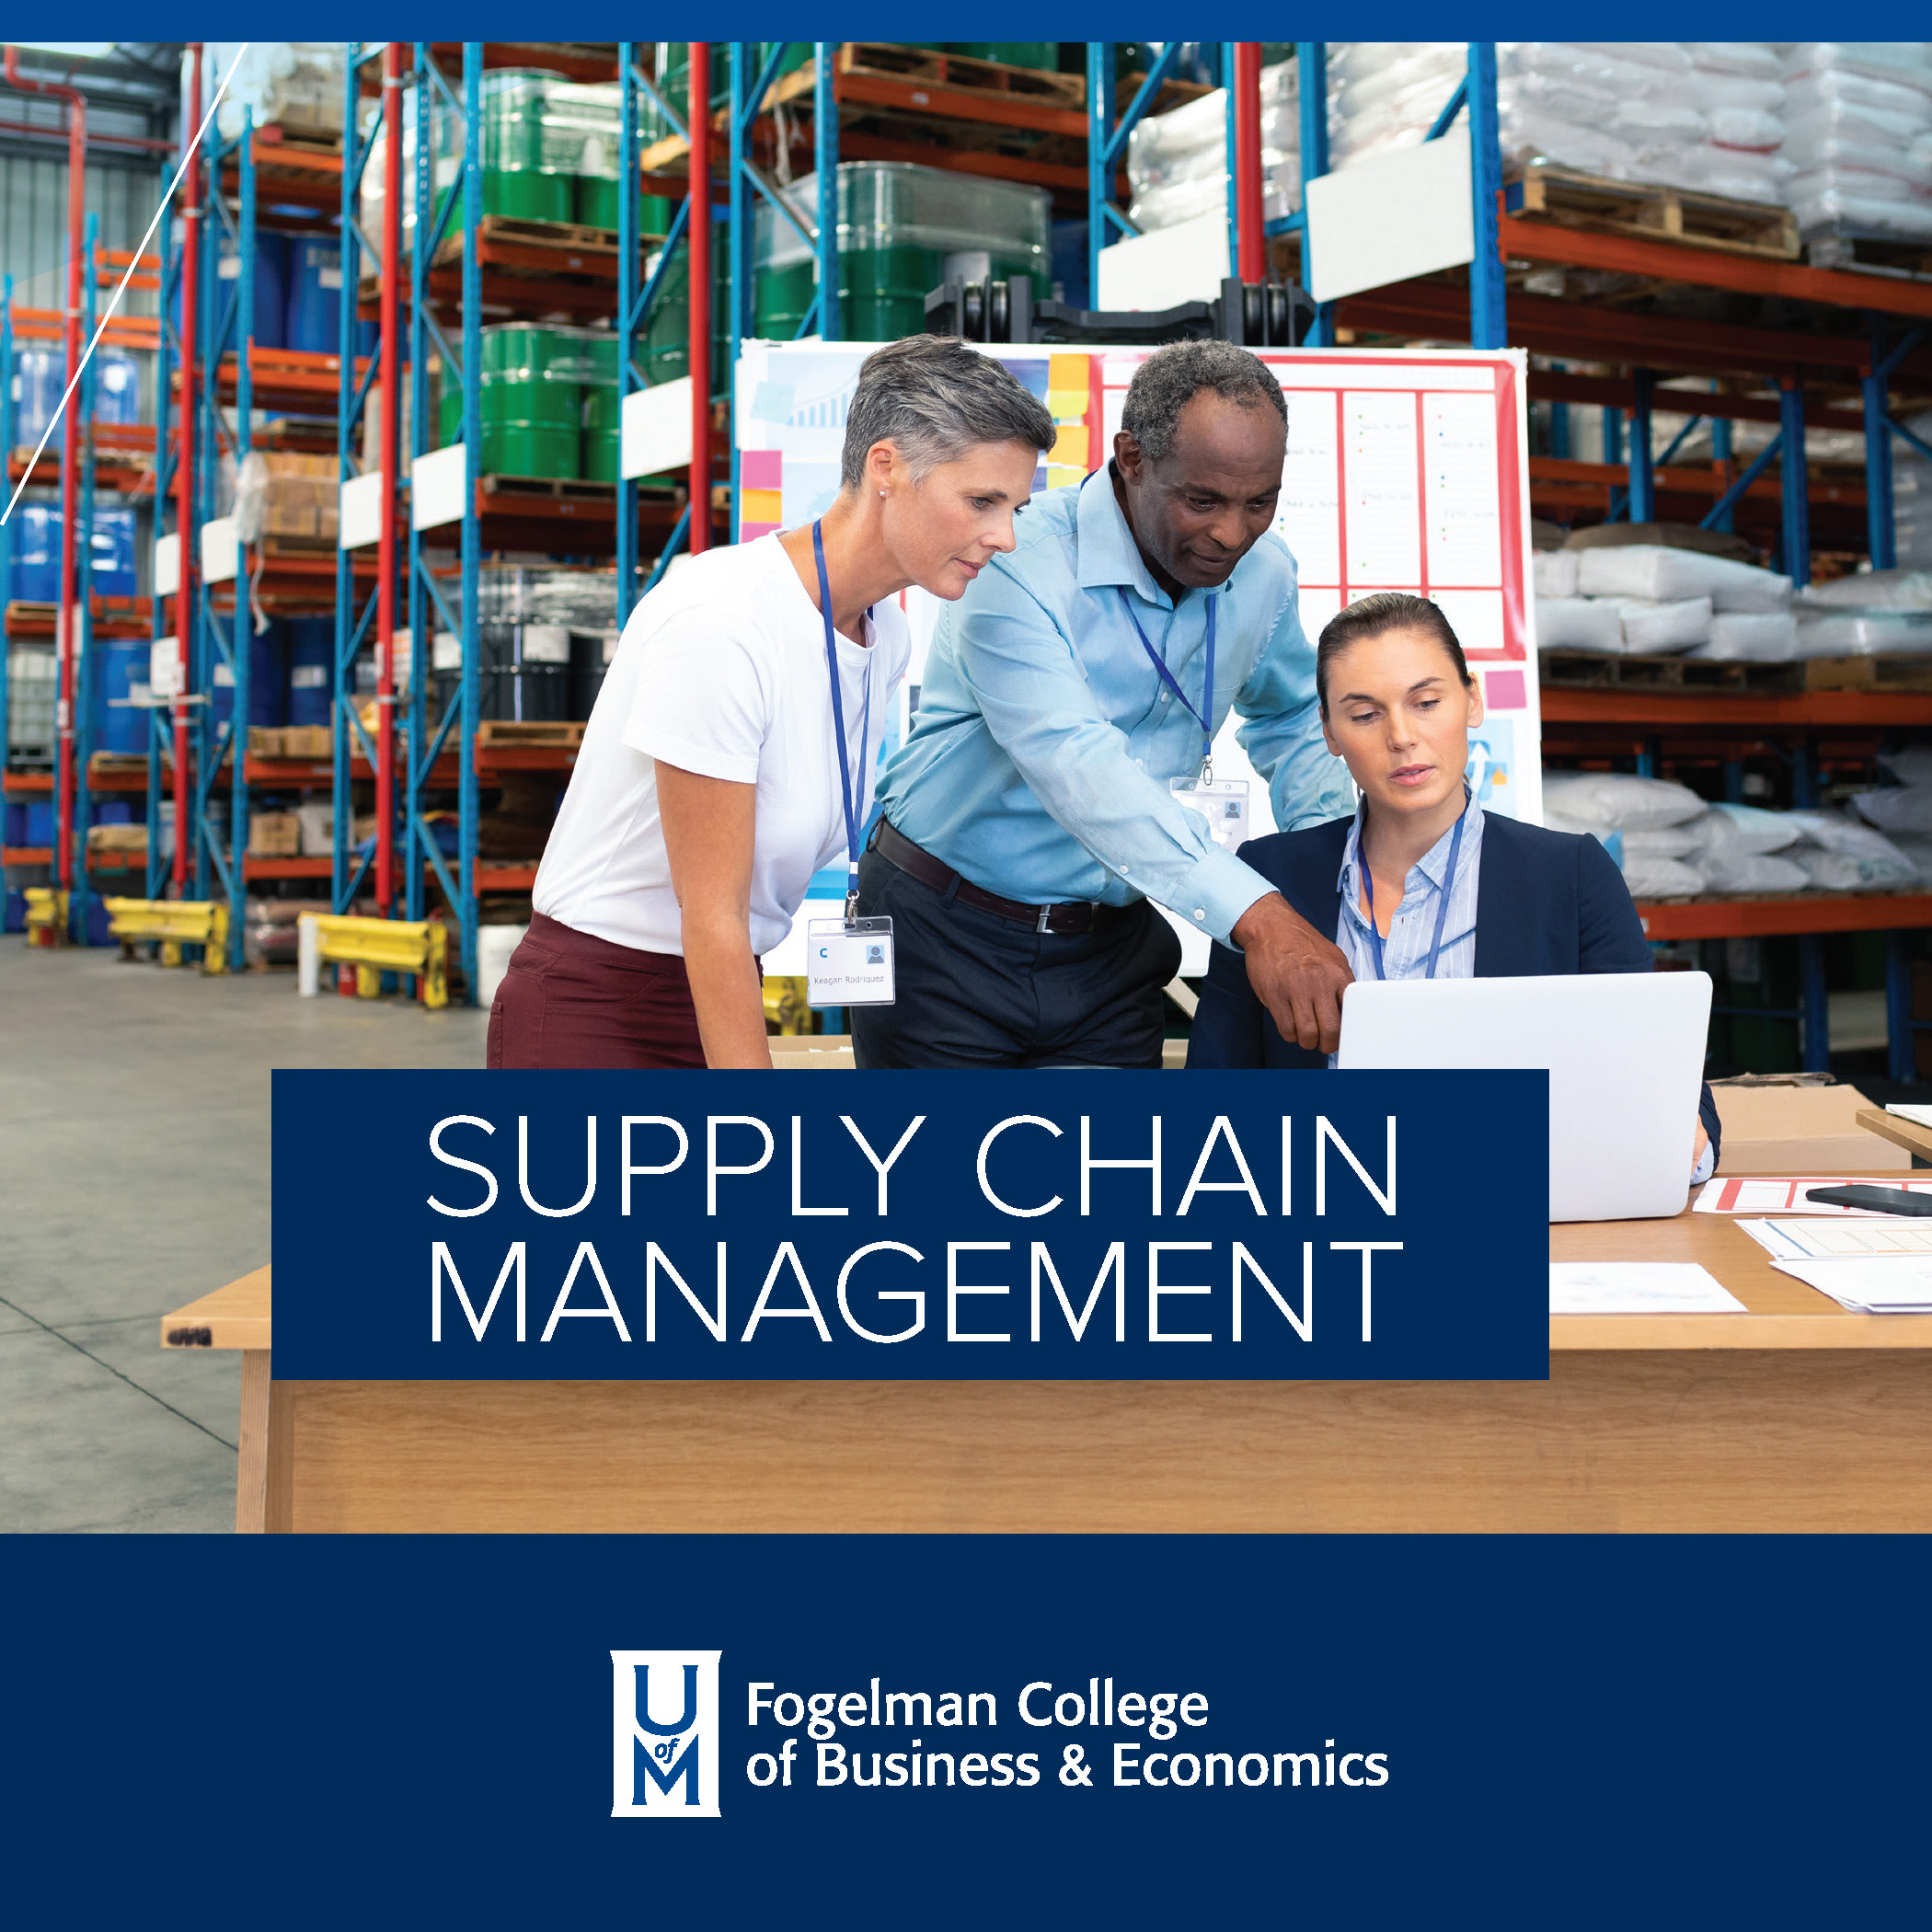 Supply Chain Management Brochure Cover